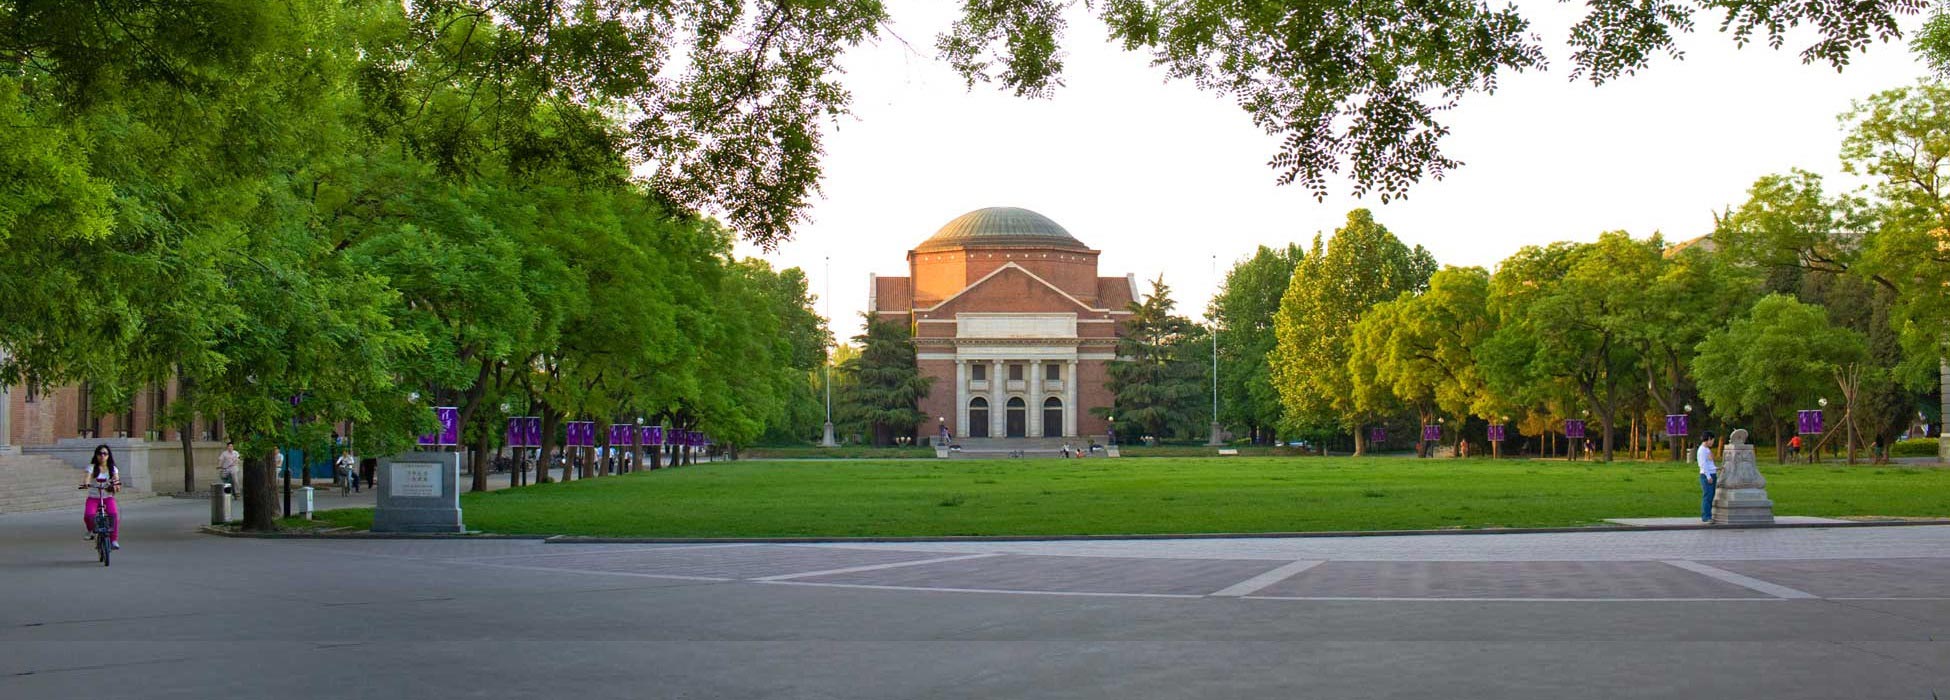 Is Tsinghua the best University in the world?